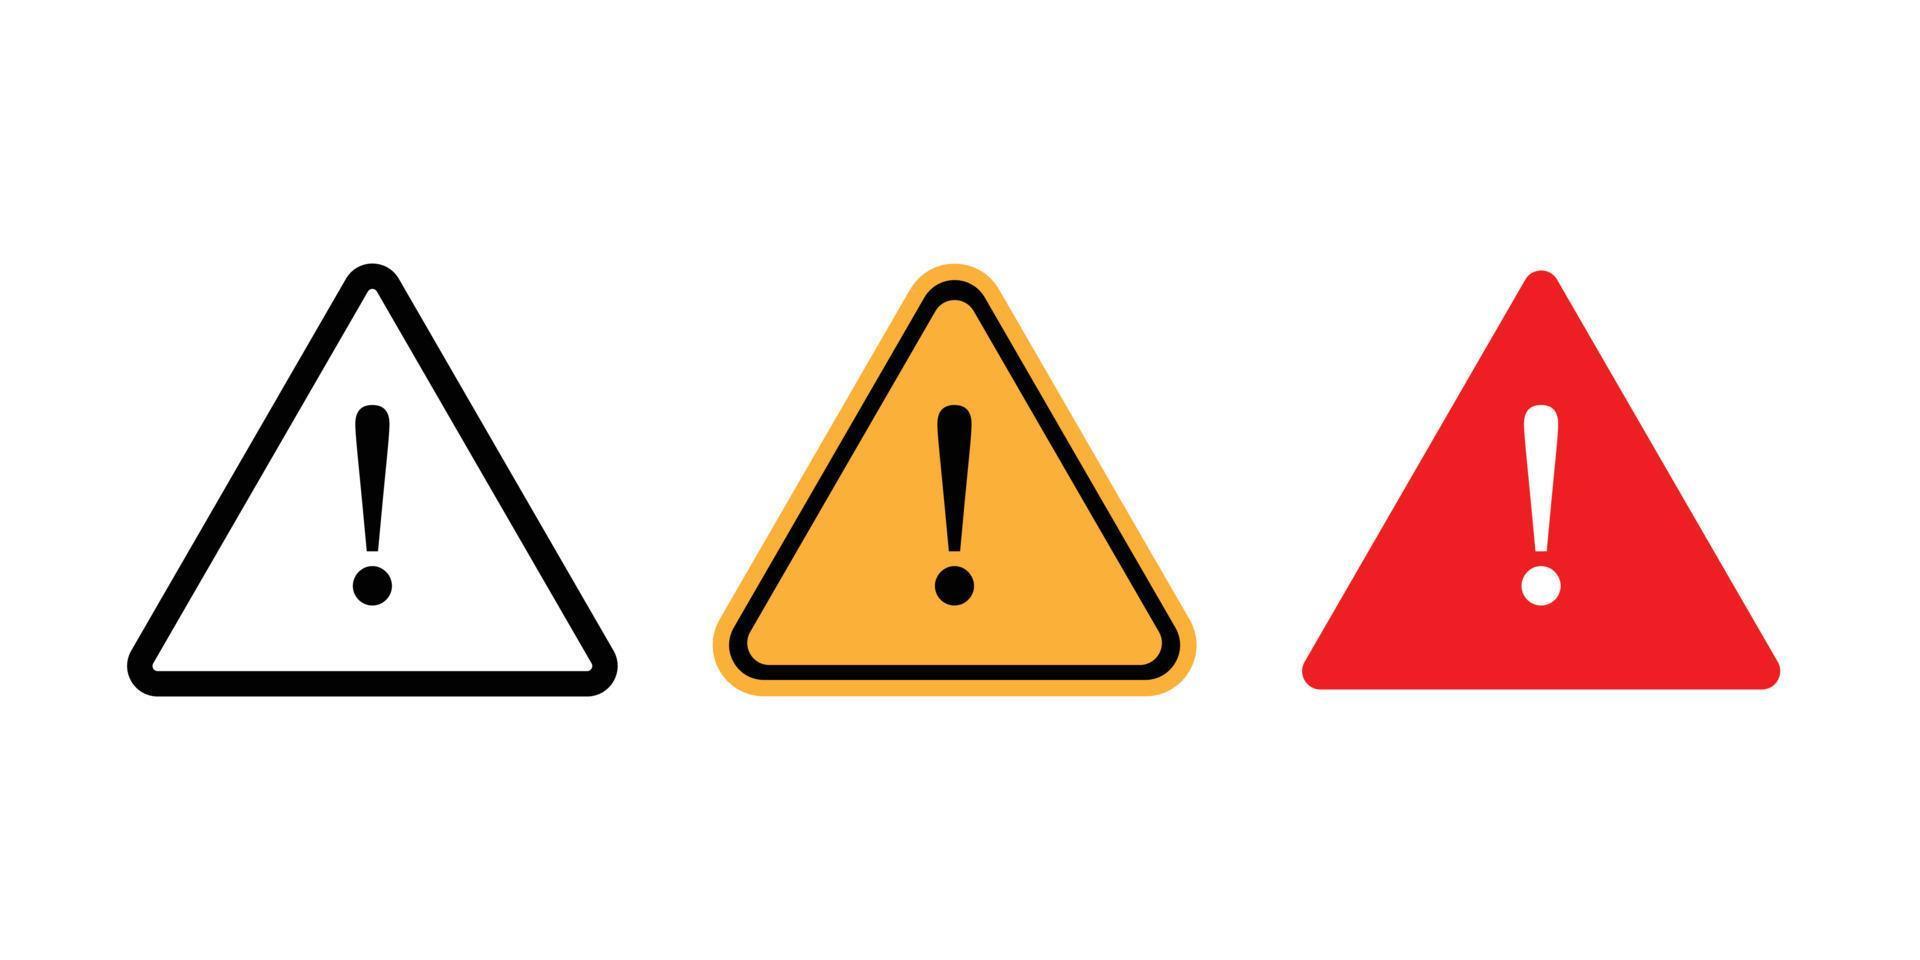 Caution sign in various colors vector